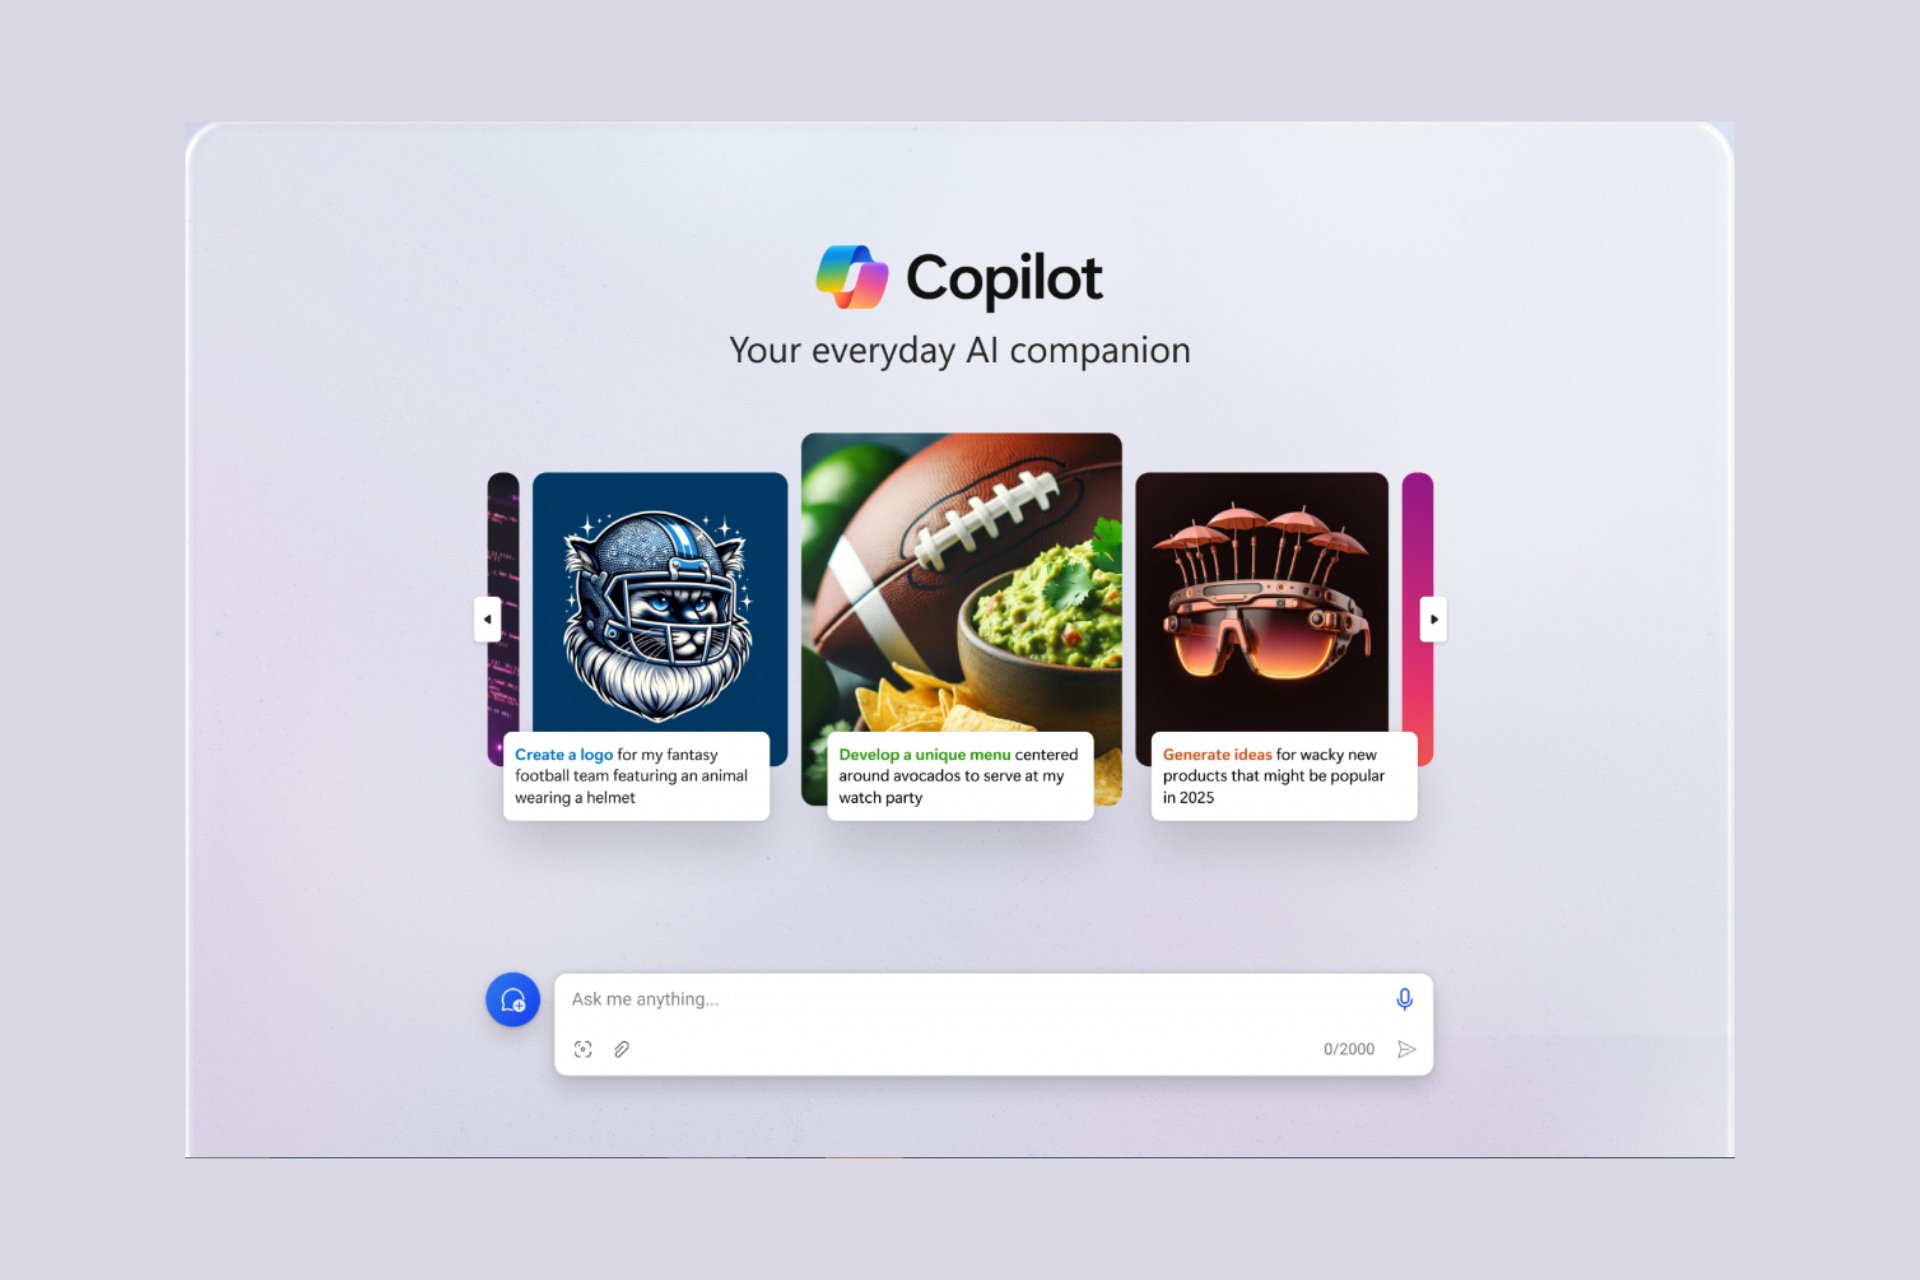 Microsoft redesigns Copilot app for its 1 year anniversary